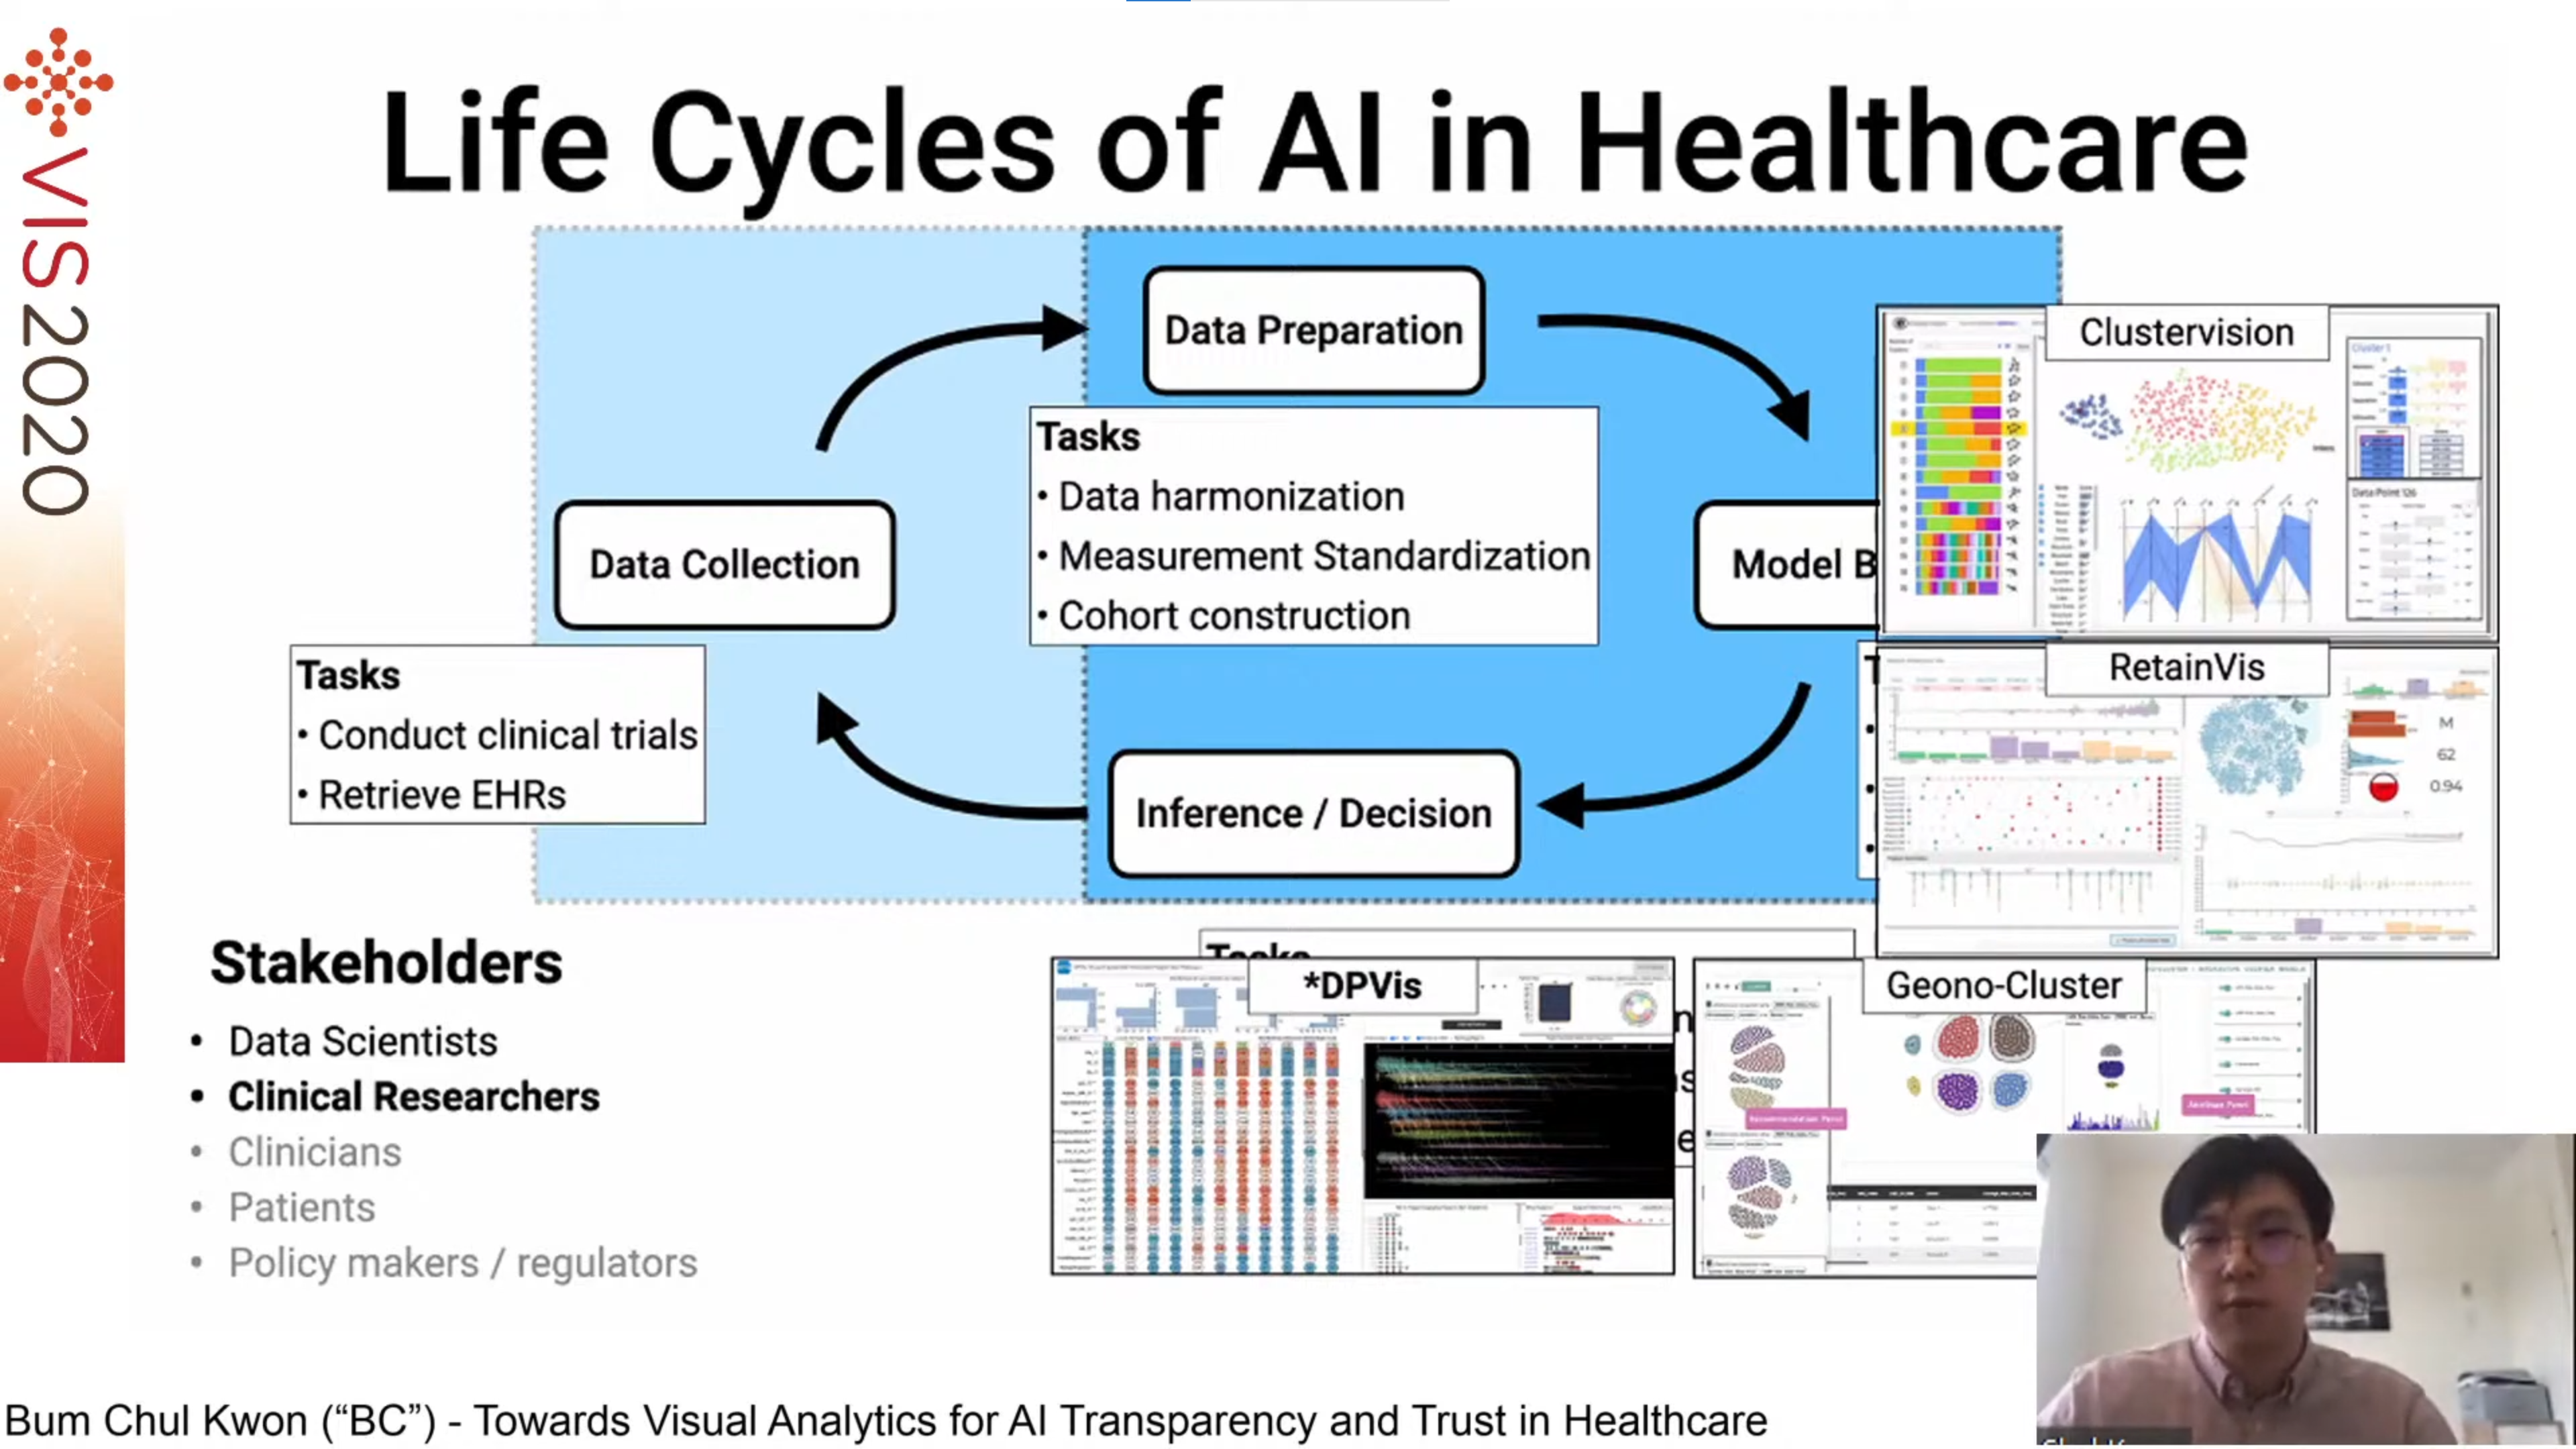 Role of clinical researchers in the AI lifecycle